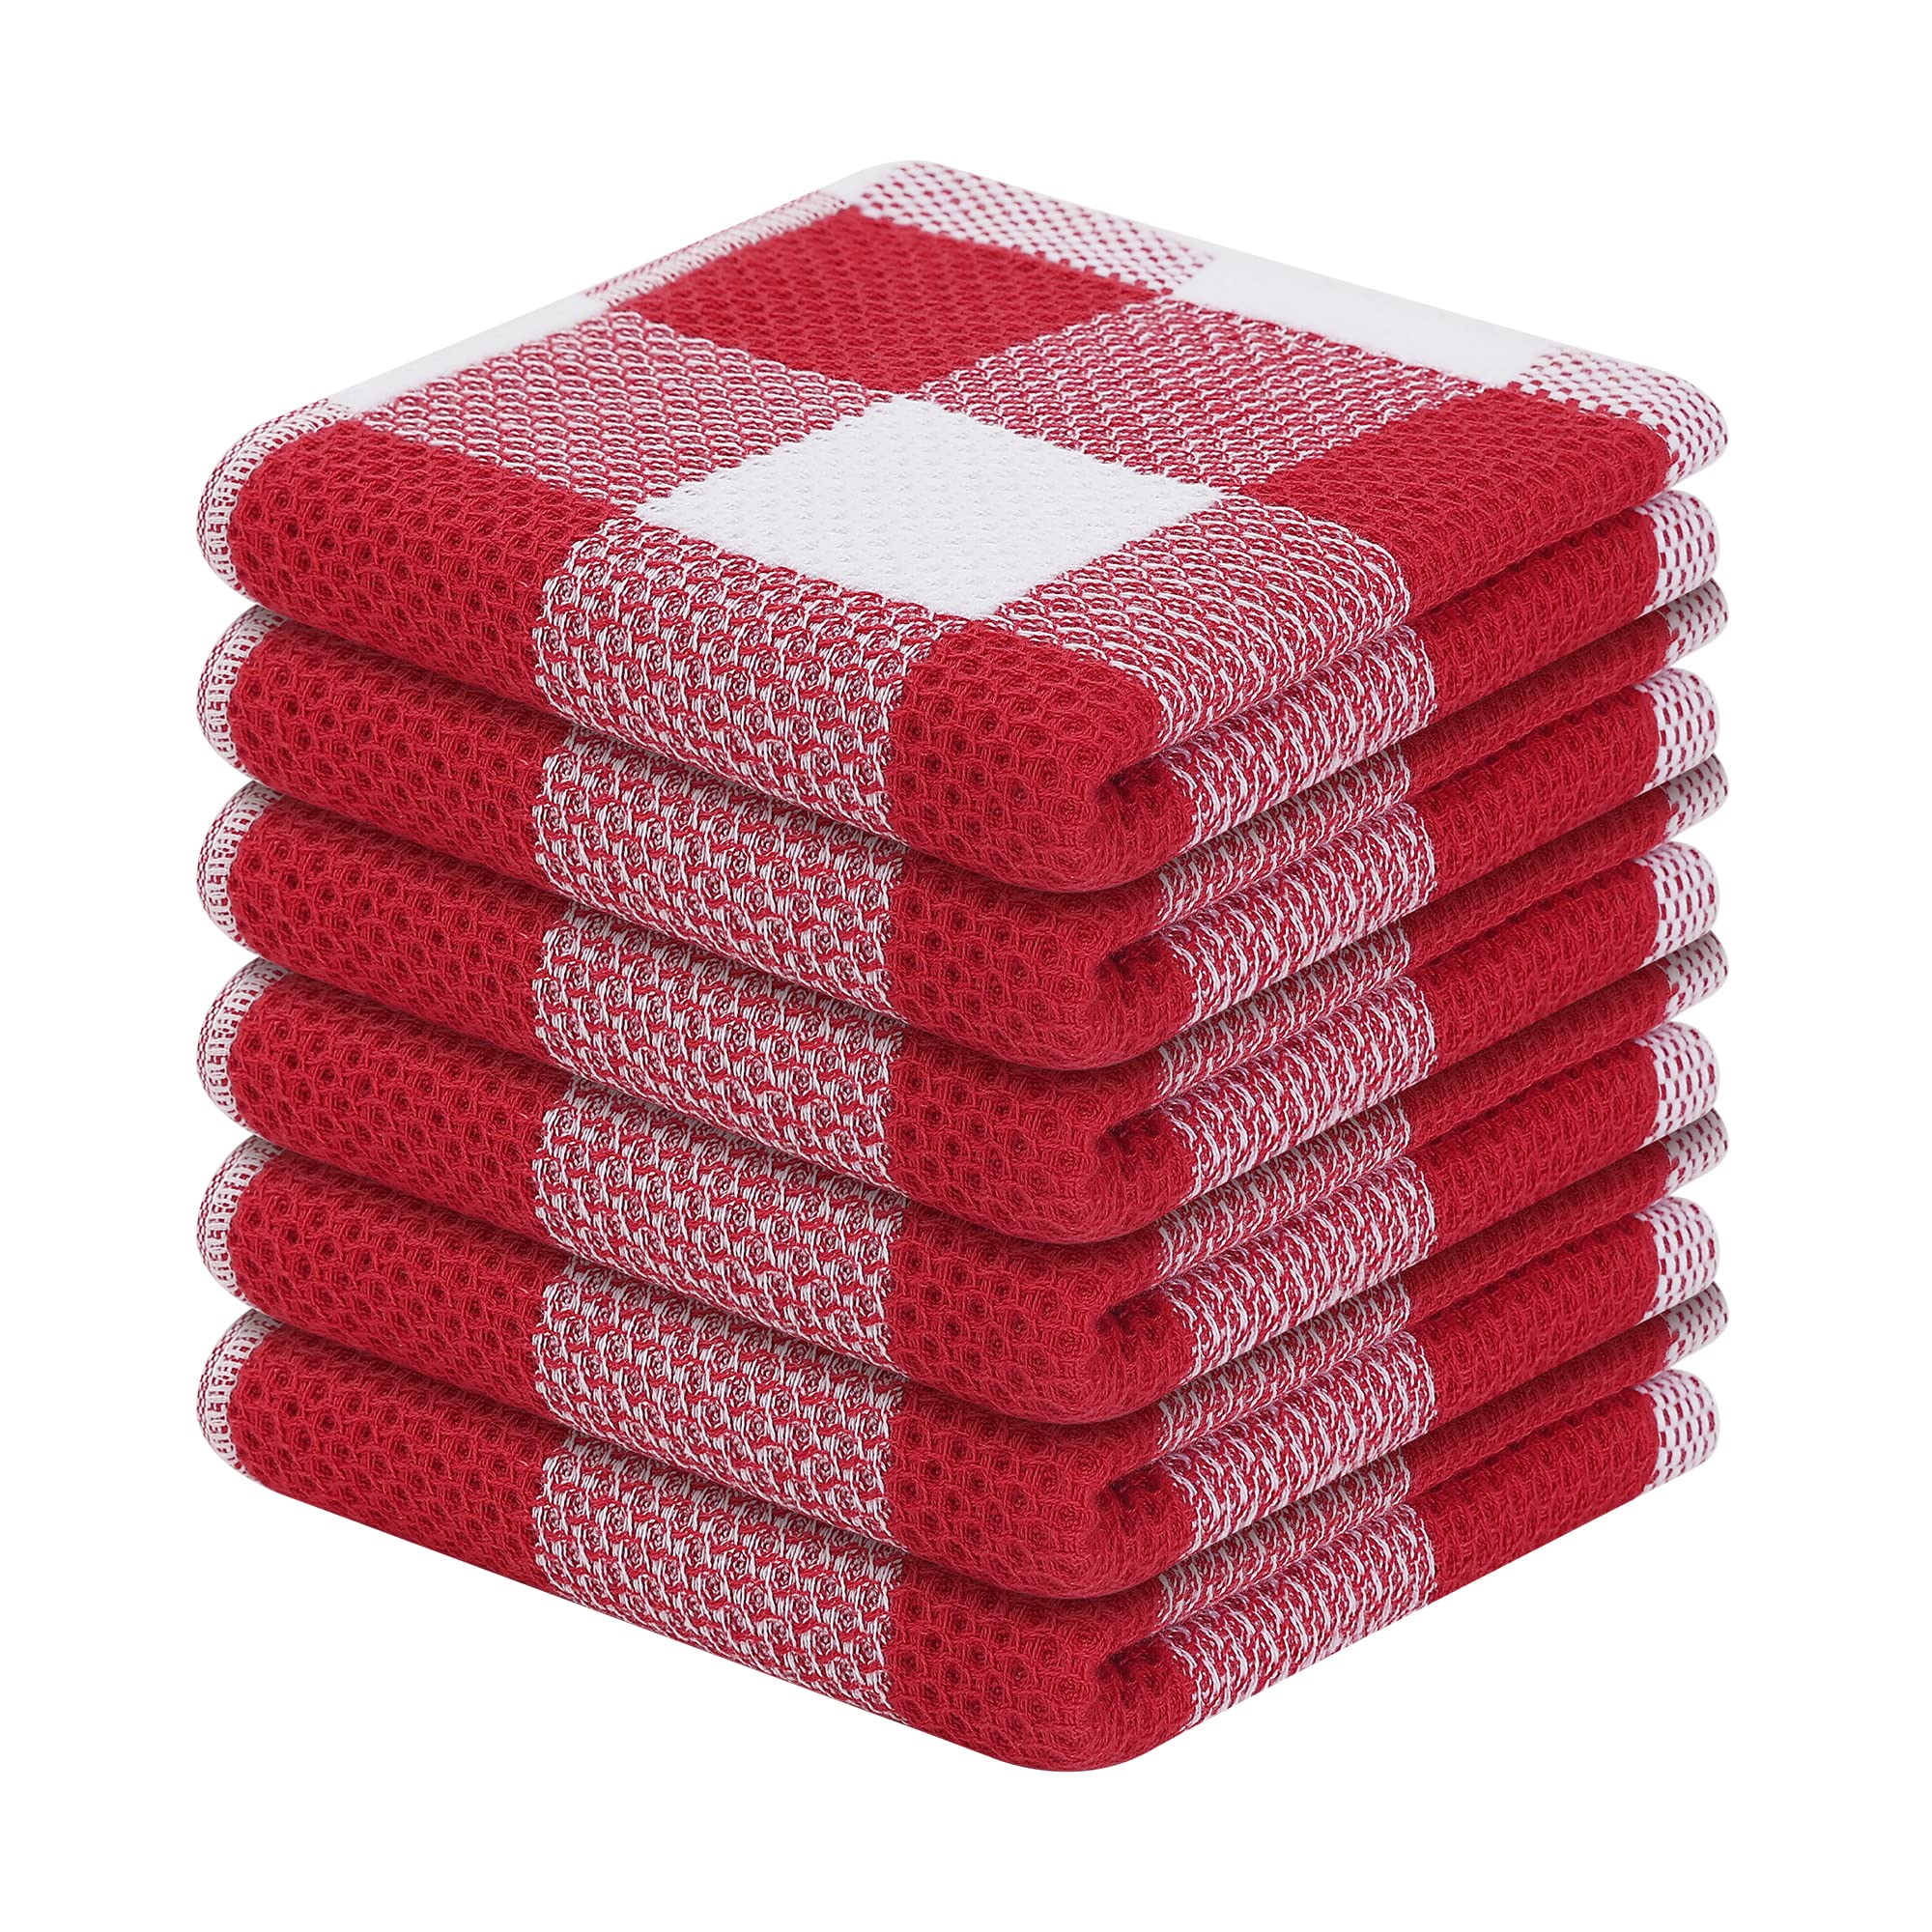 Red Dish Towels, 4-Pack